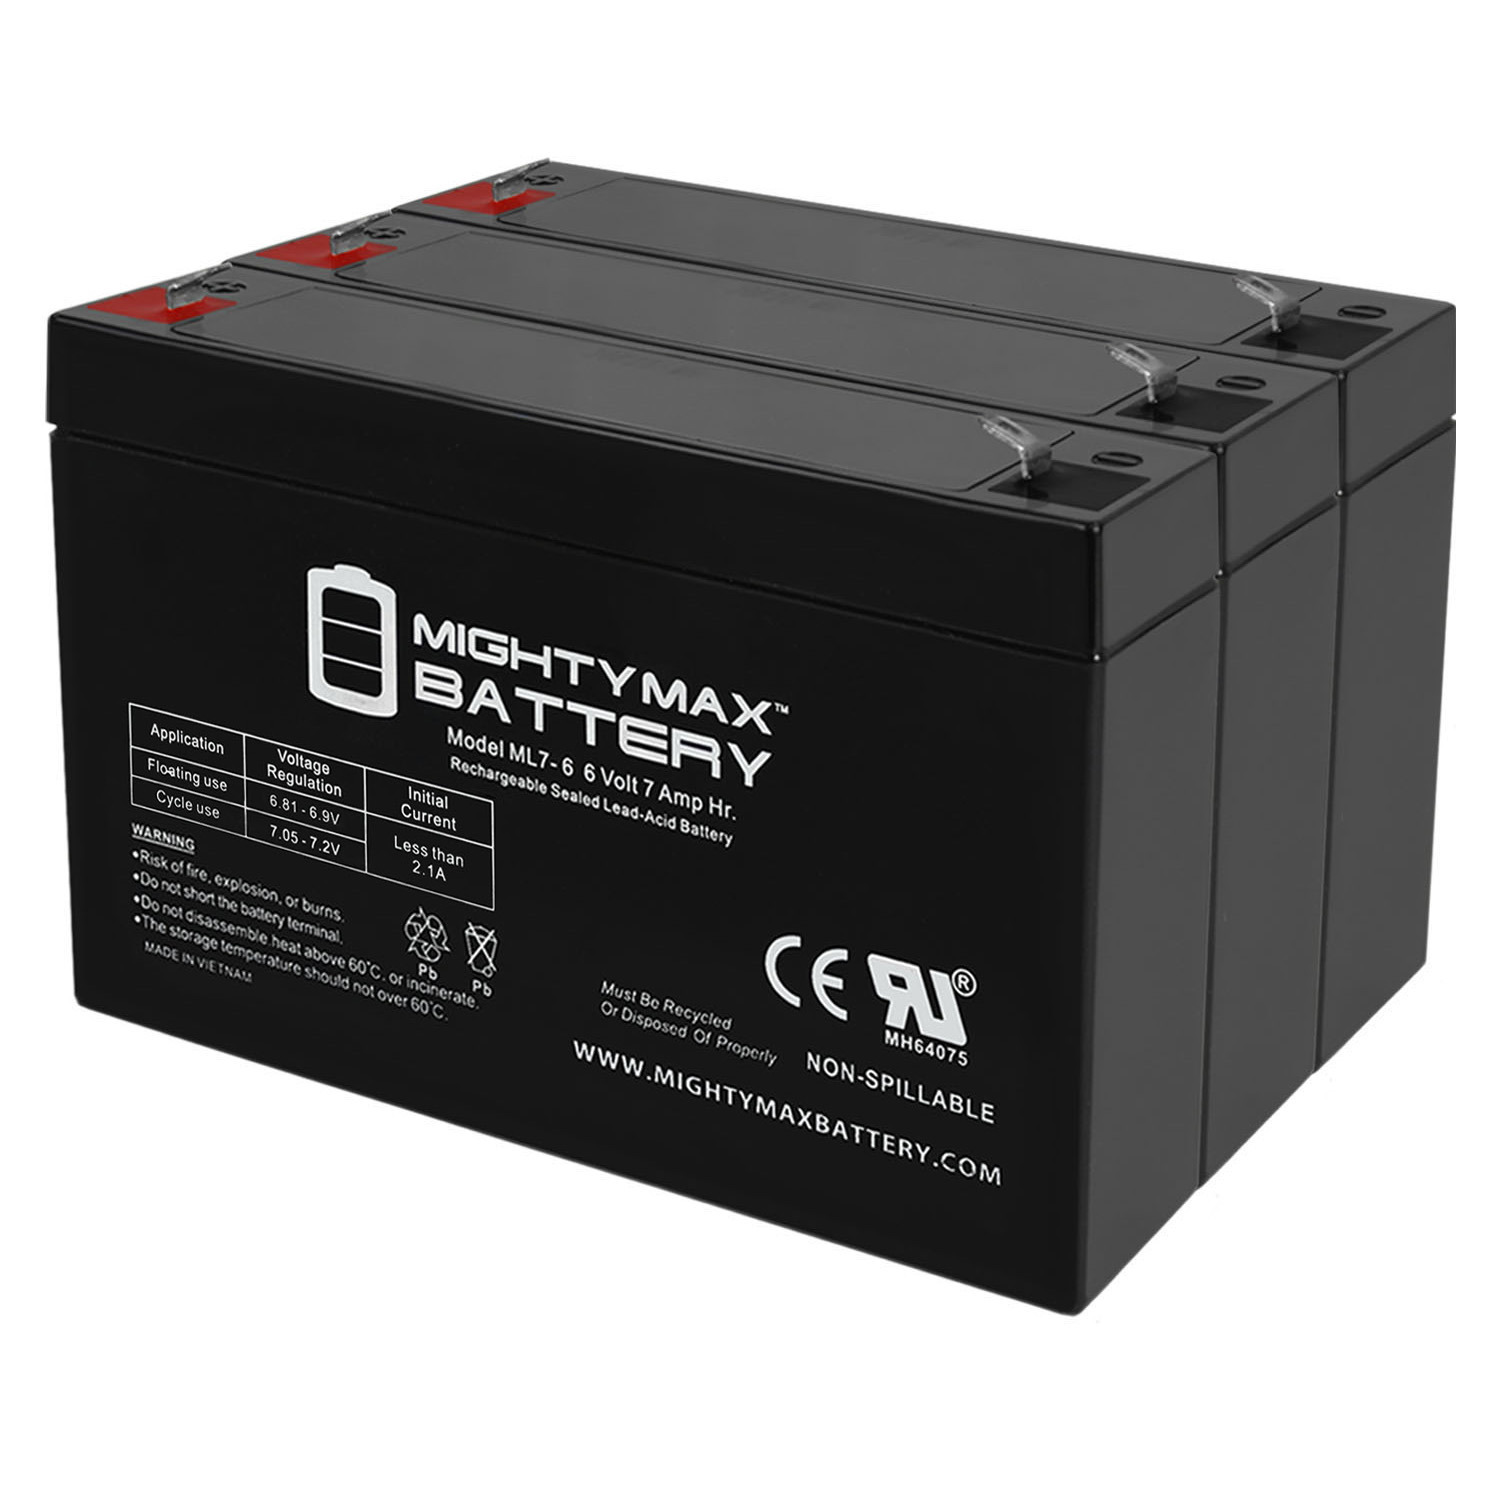 6V 7AH DSM18 SLA Replacement Battery with F1 Terminal - 3 Pack